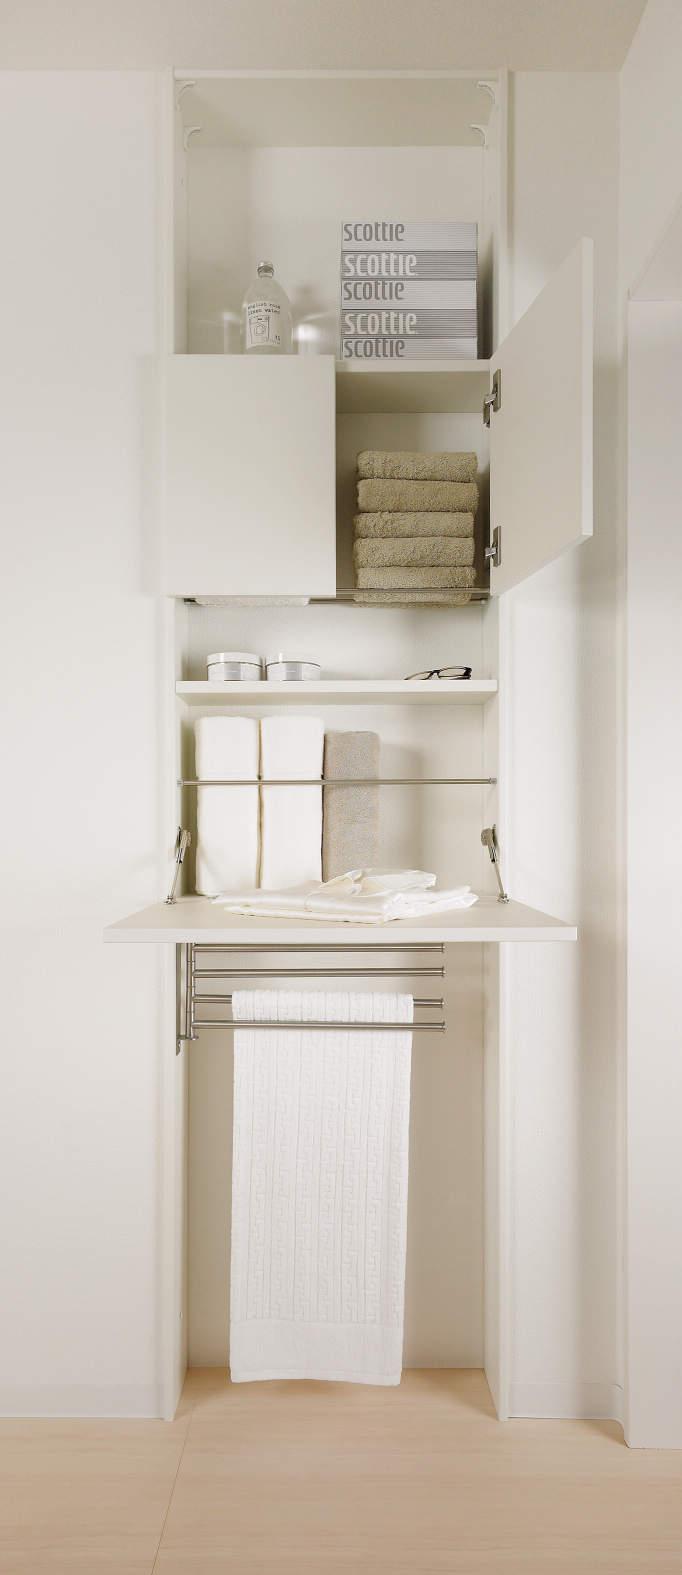 Other Equipment. Storage capacity of plus α to the washroom. There is a towel over is useful. 